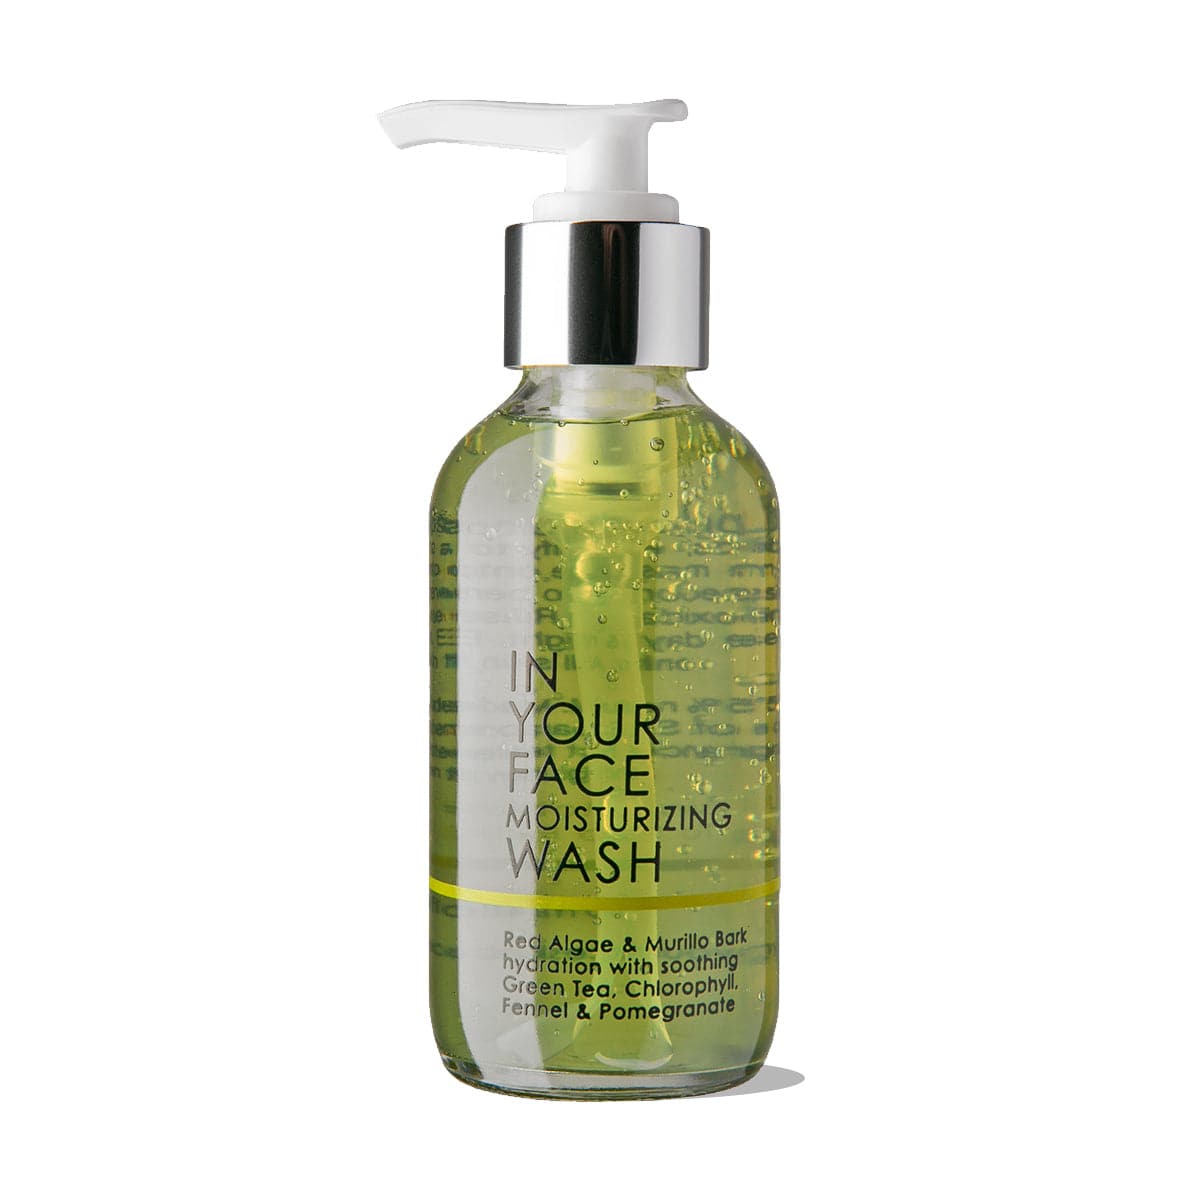 A photo of the IN YOUR FACE MOISTURIZING WASH on a white background. The bottle shows the wash inside to be a medium green color. The bottle also says "Red Algae & Murillo Bark hydration with soothing Green Tea, Chlorophyll, Fennel & Pomegranate".